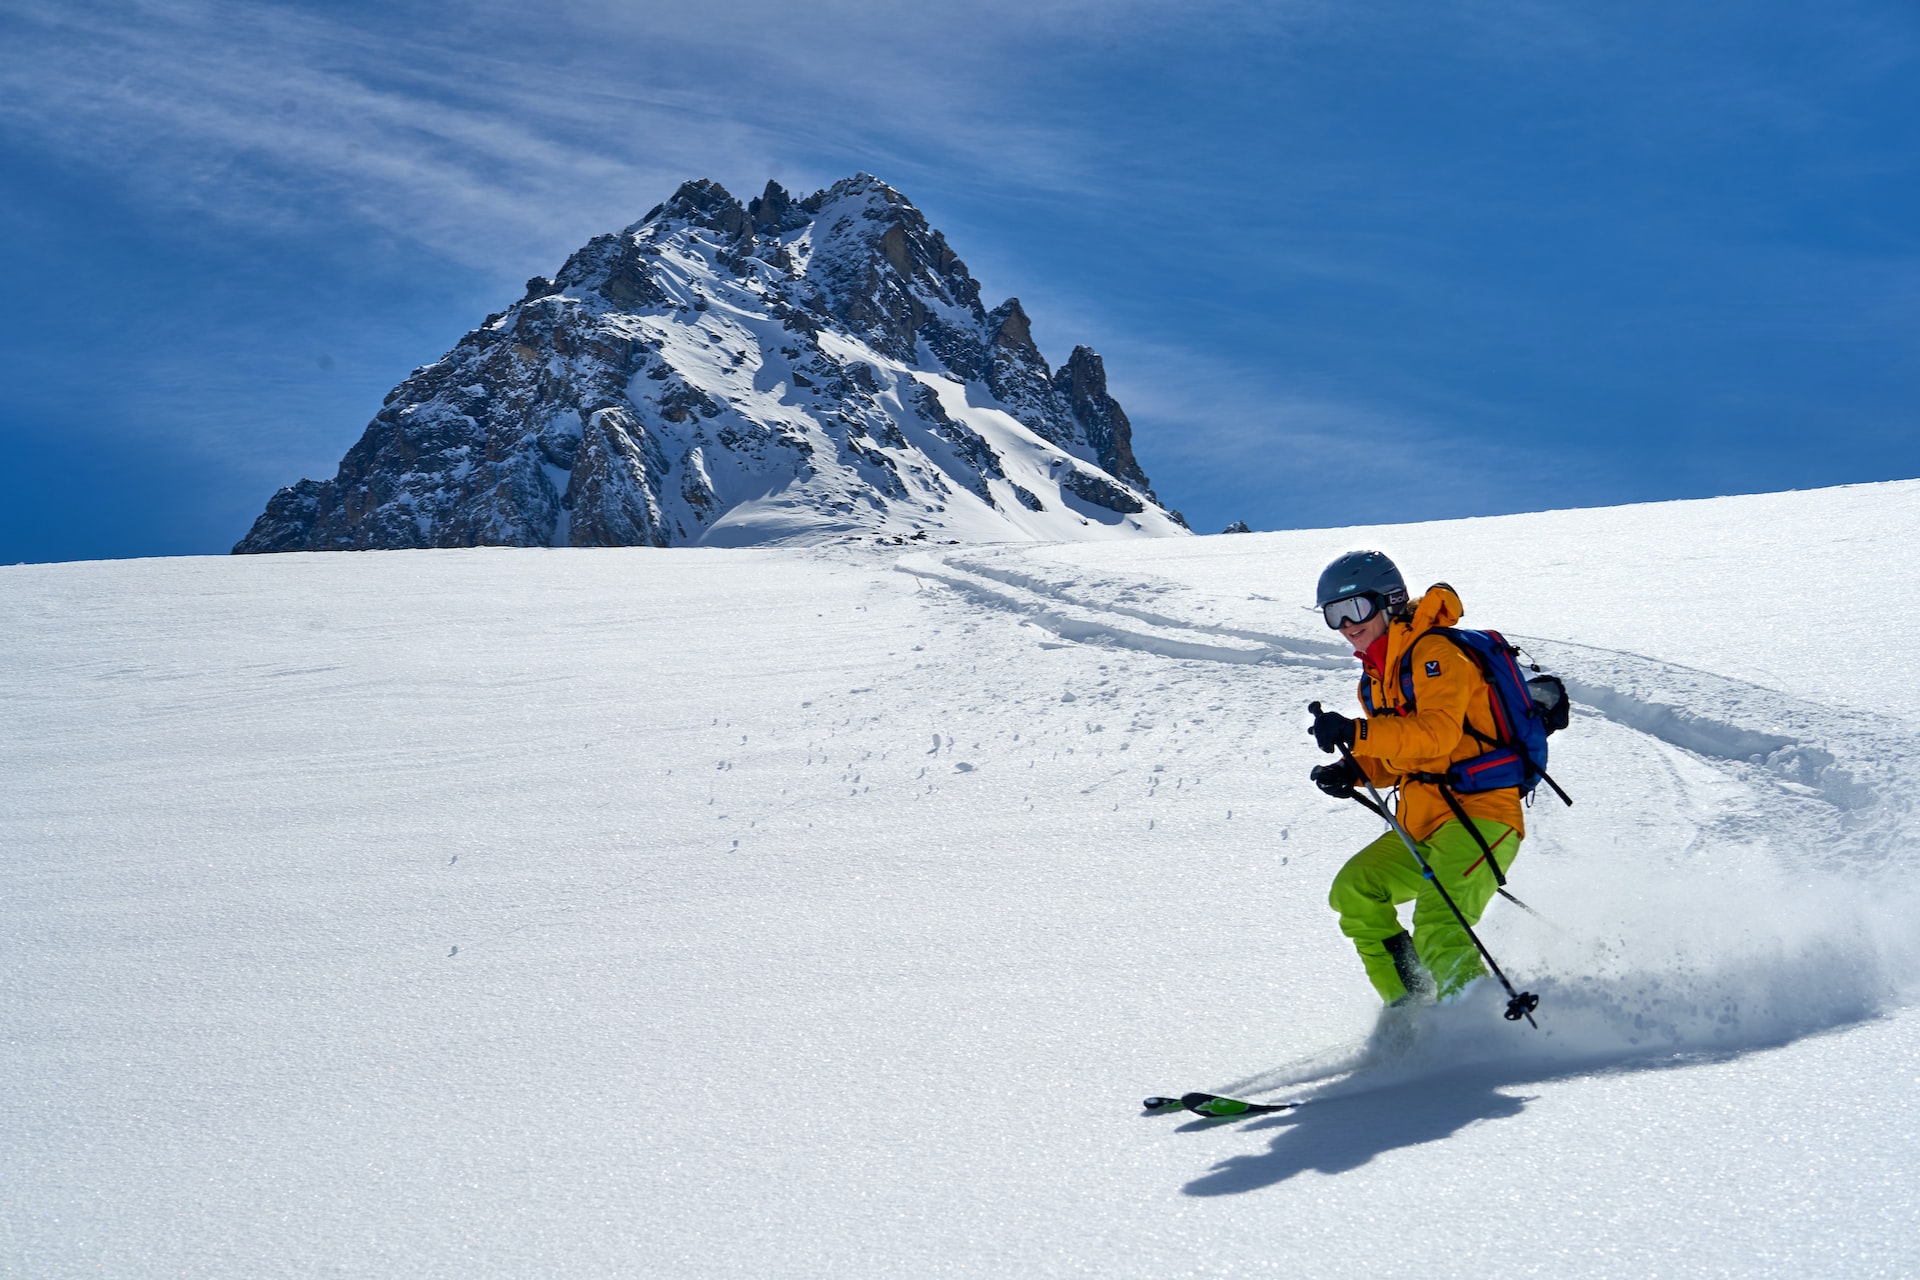 Which Apparel You Need To Buy Before Skiing